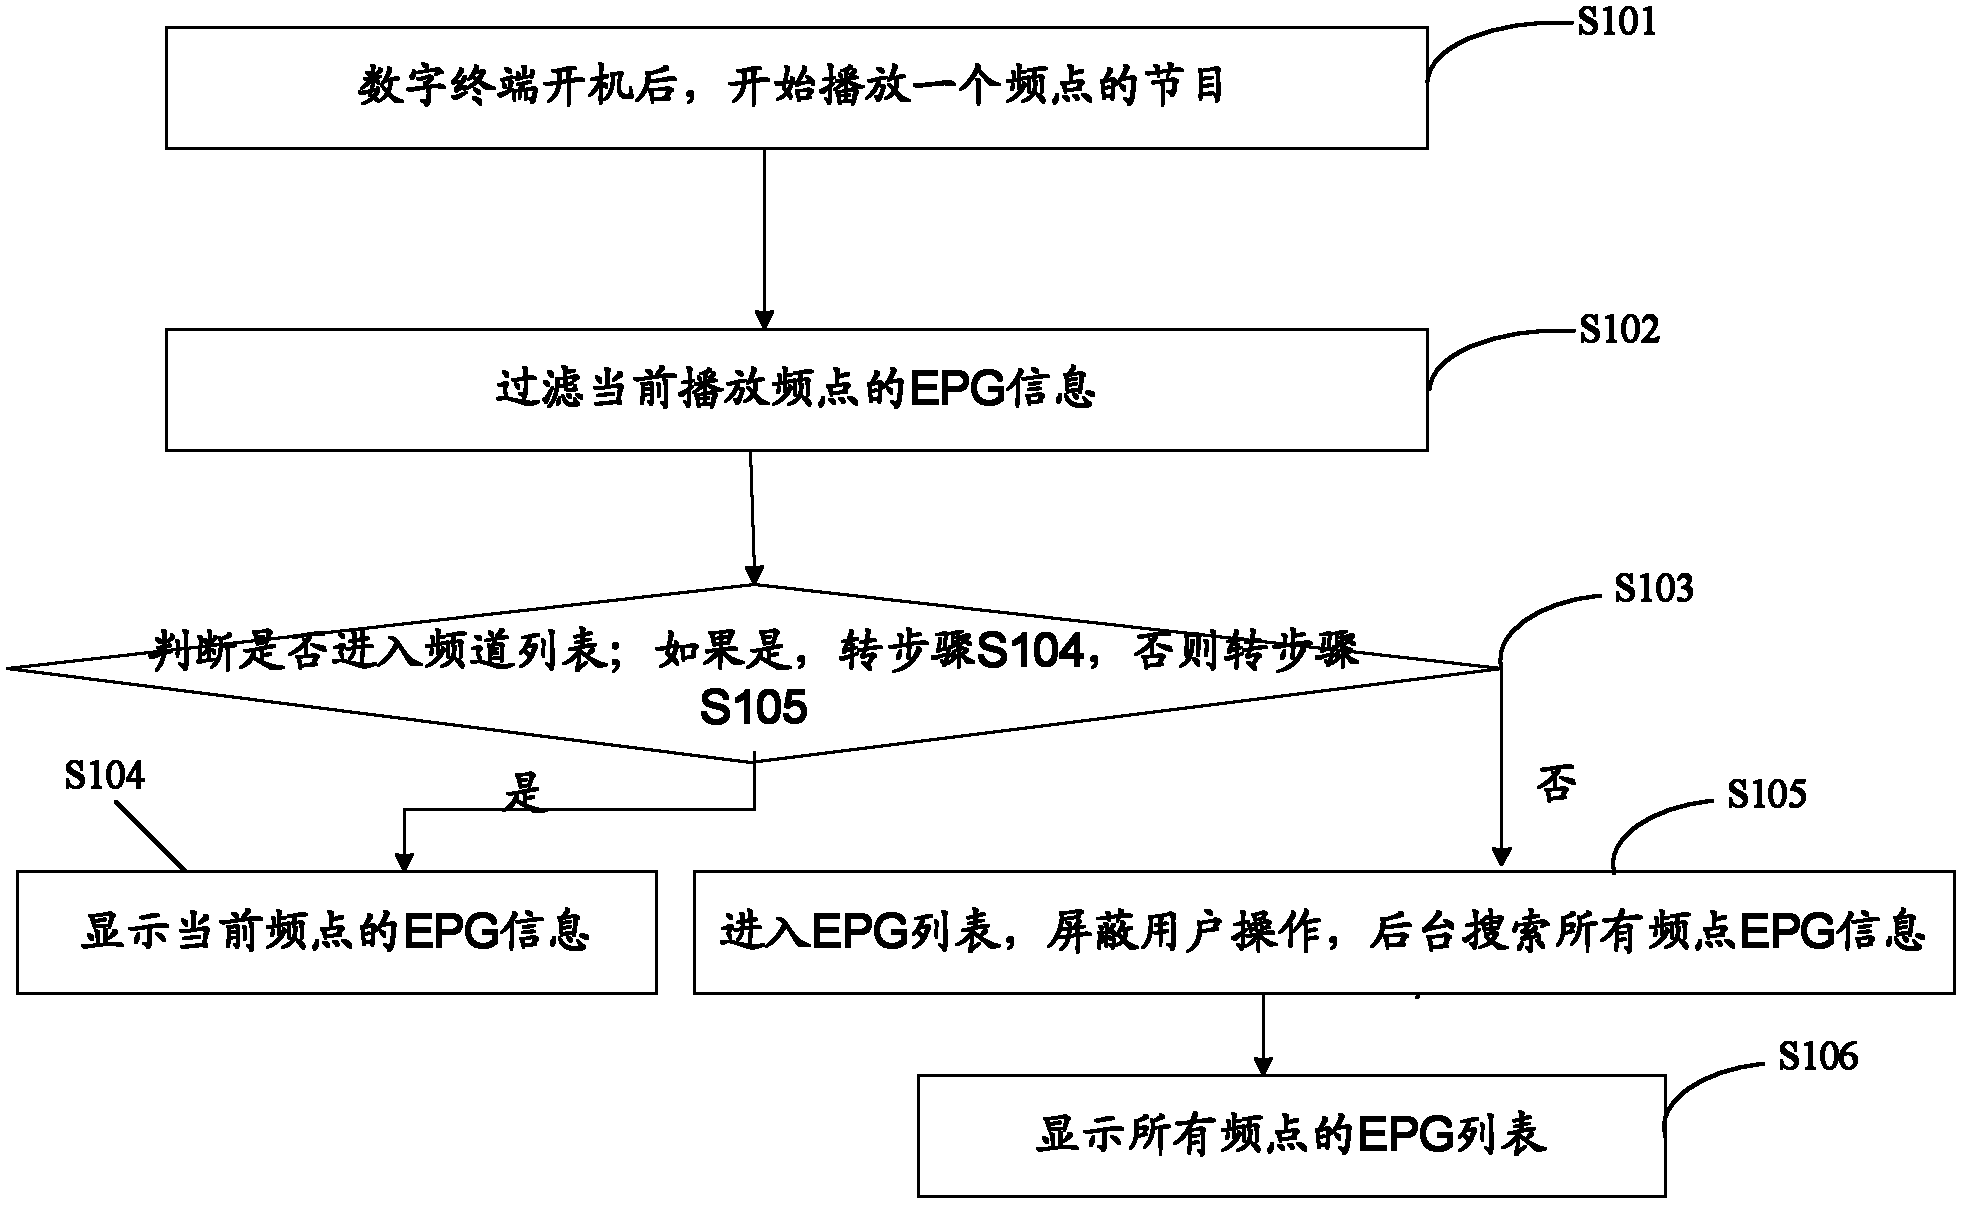 Method for acquiring multi-frequency-point EPG (Electronic Program Guide) information